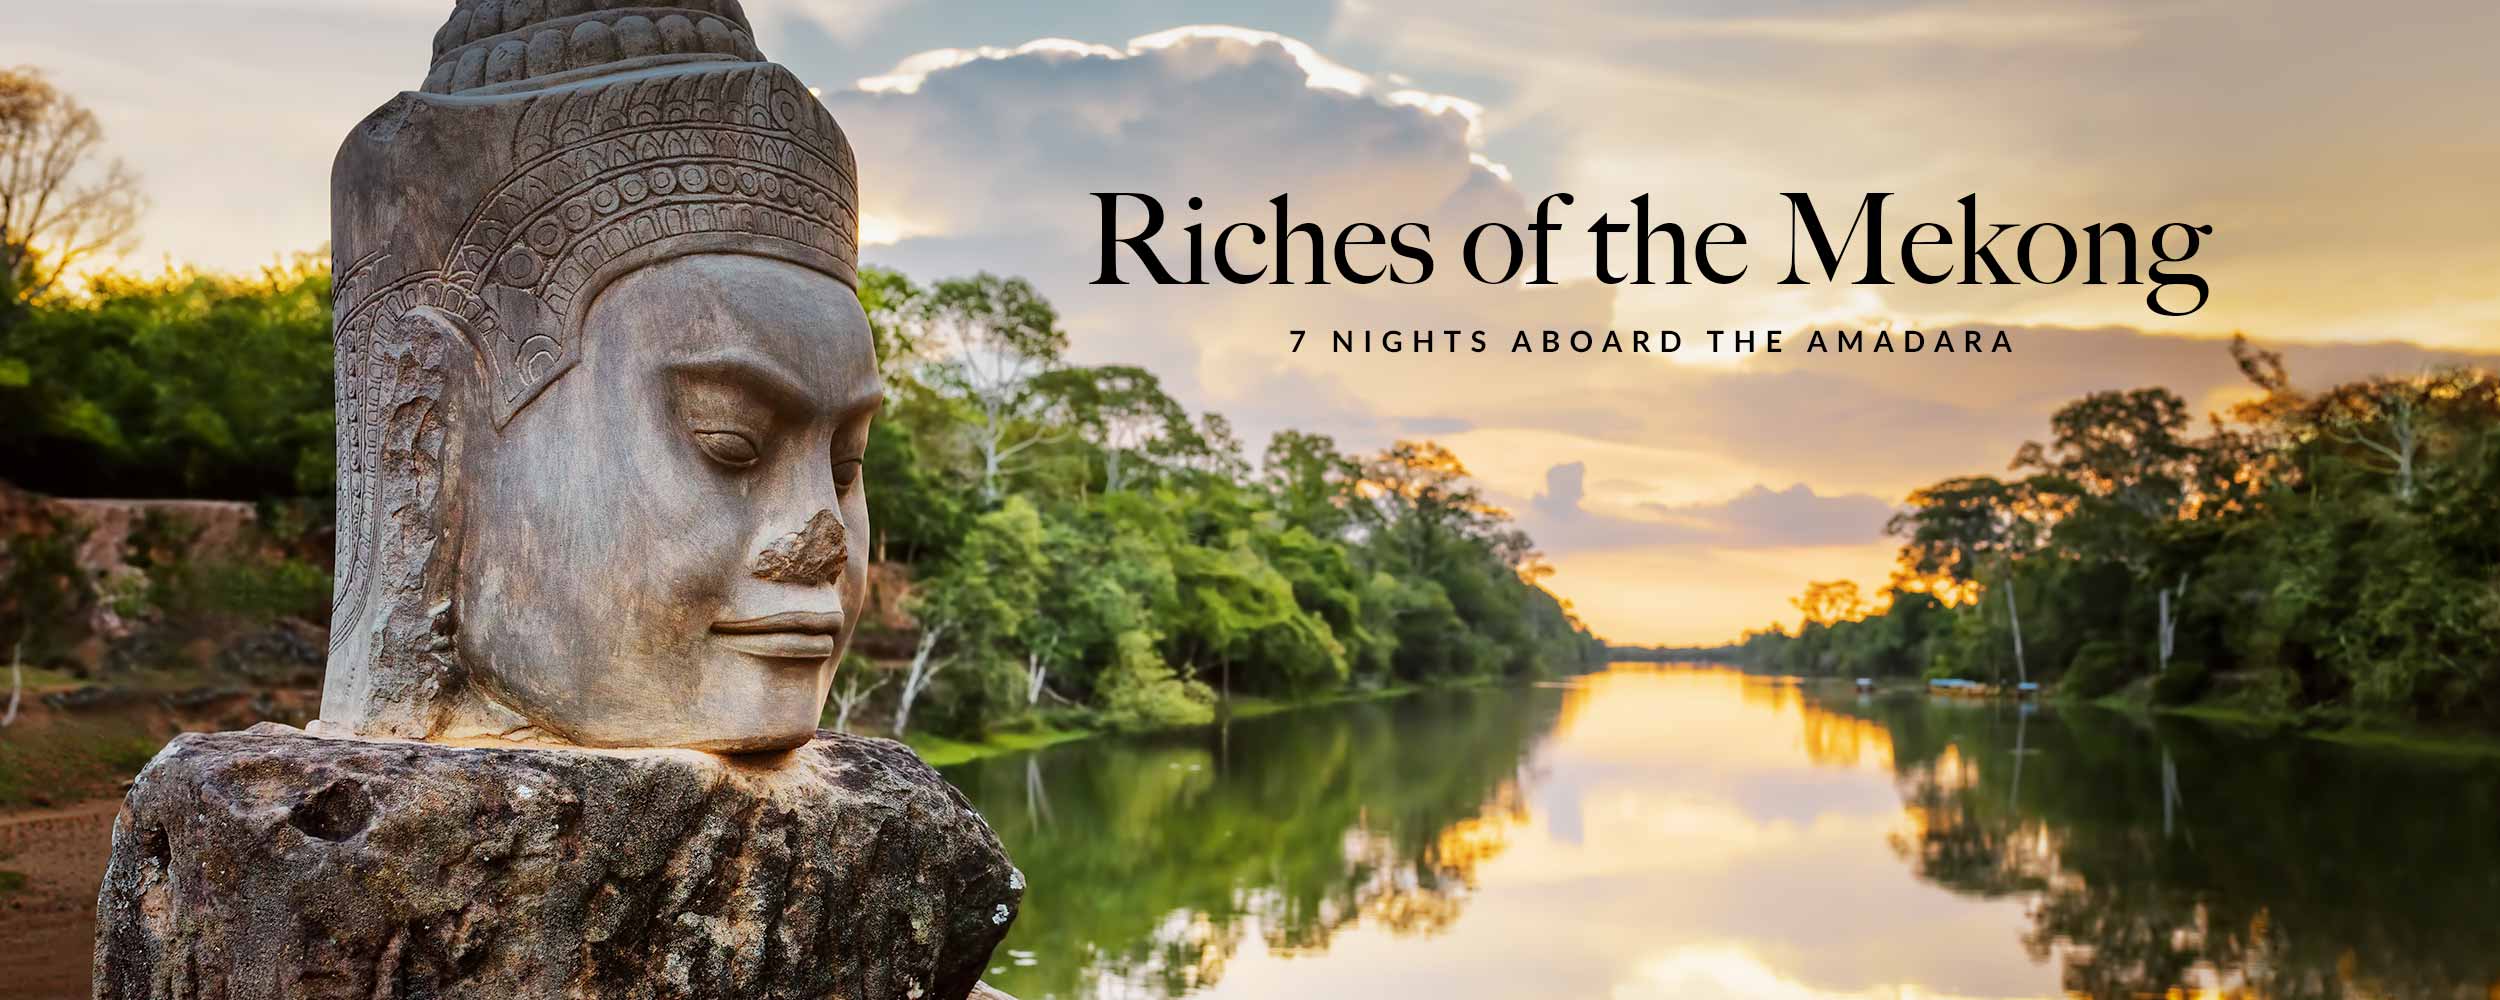 riches of the mekong statue and river